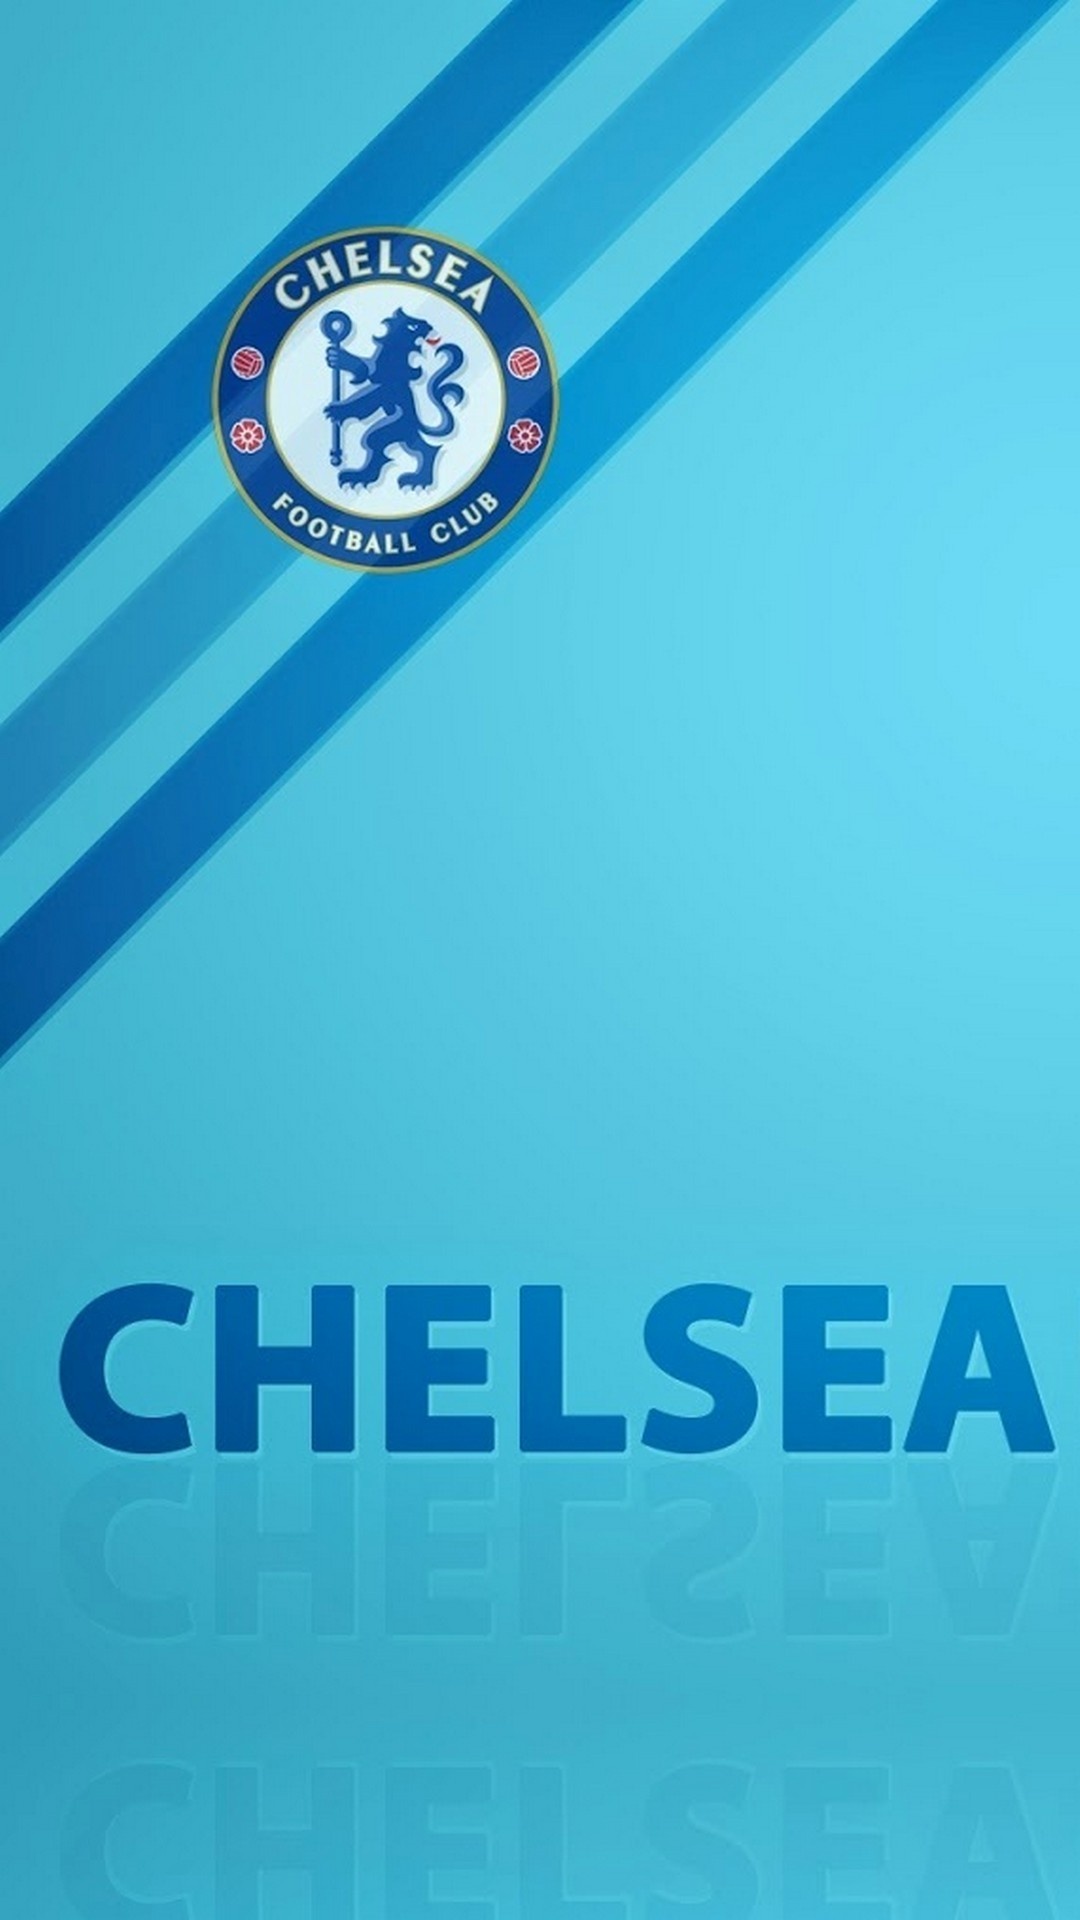 Chelsea: One of the world's top football clubs and reigning champions of Europe. 1080x1920 Full HD Wallpaper.